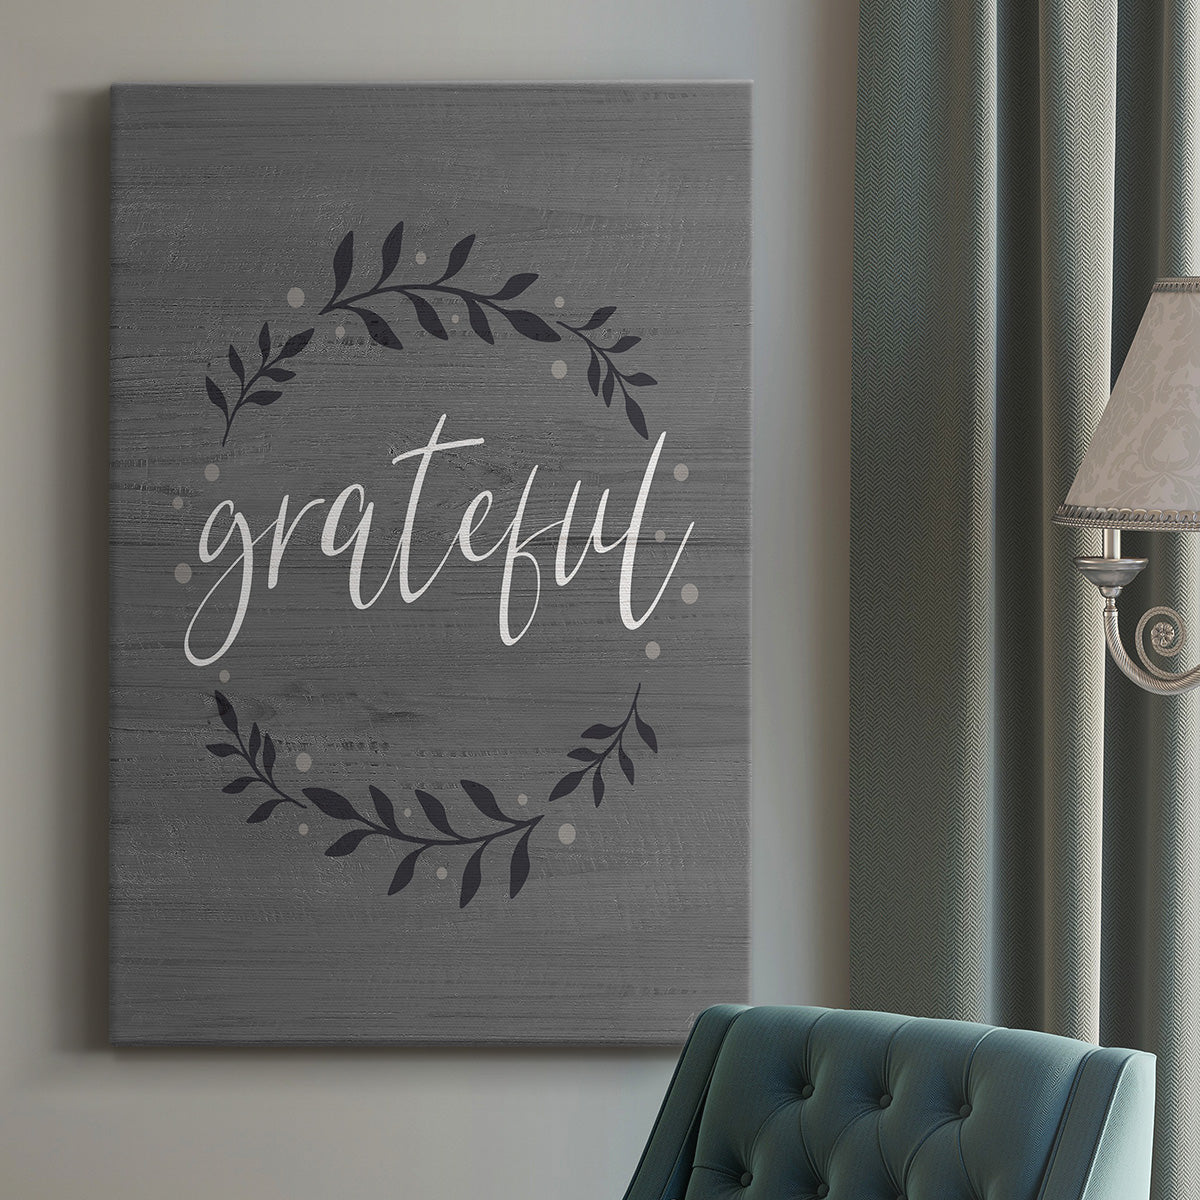 Grateful Wreath Premium Gallery Wrapped Canvas - Ready to Hang